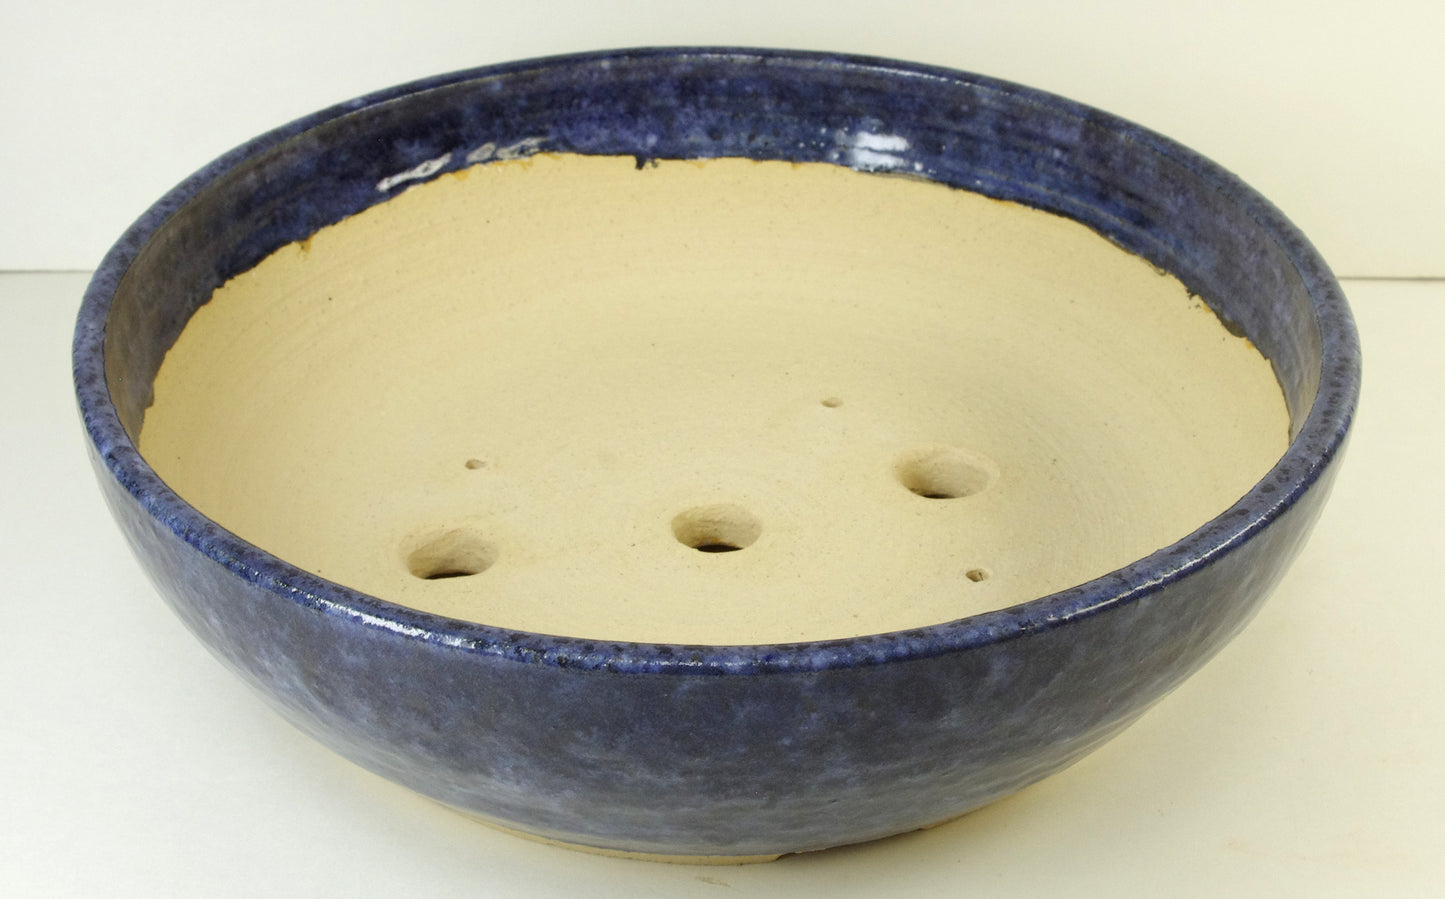 2112, Hand Thrown Stoneware Bonsai Pot, With Extra Wire Holes, 9 3/4 x 2 3/4, Blues